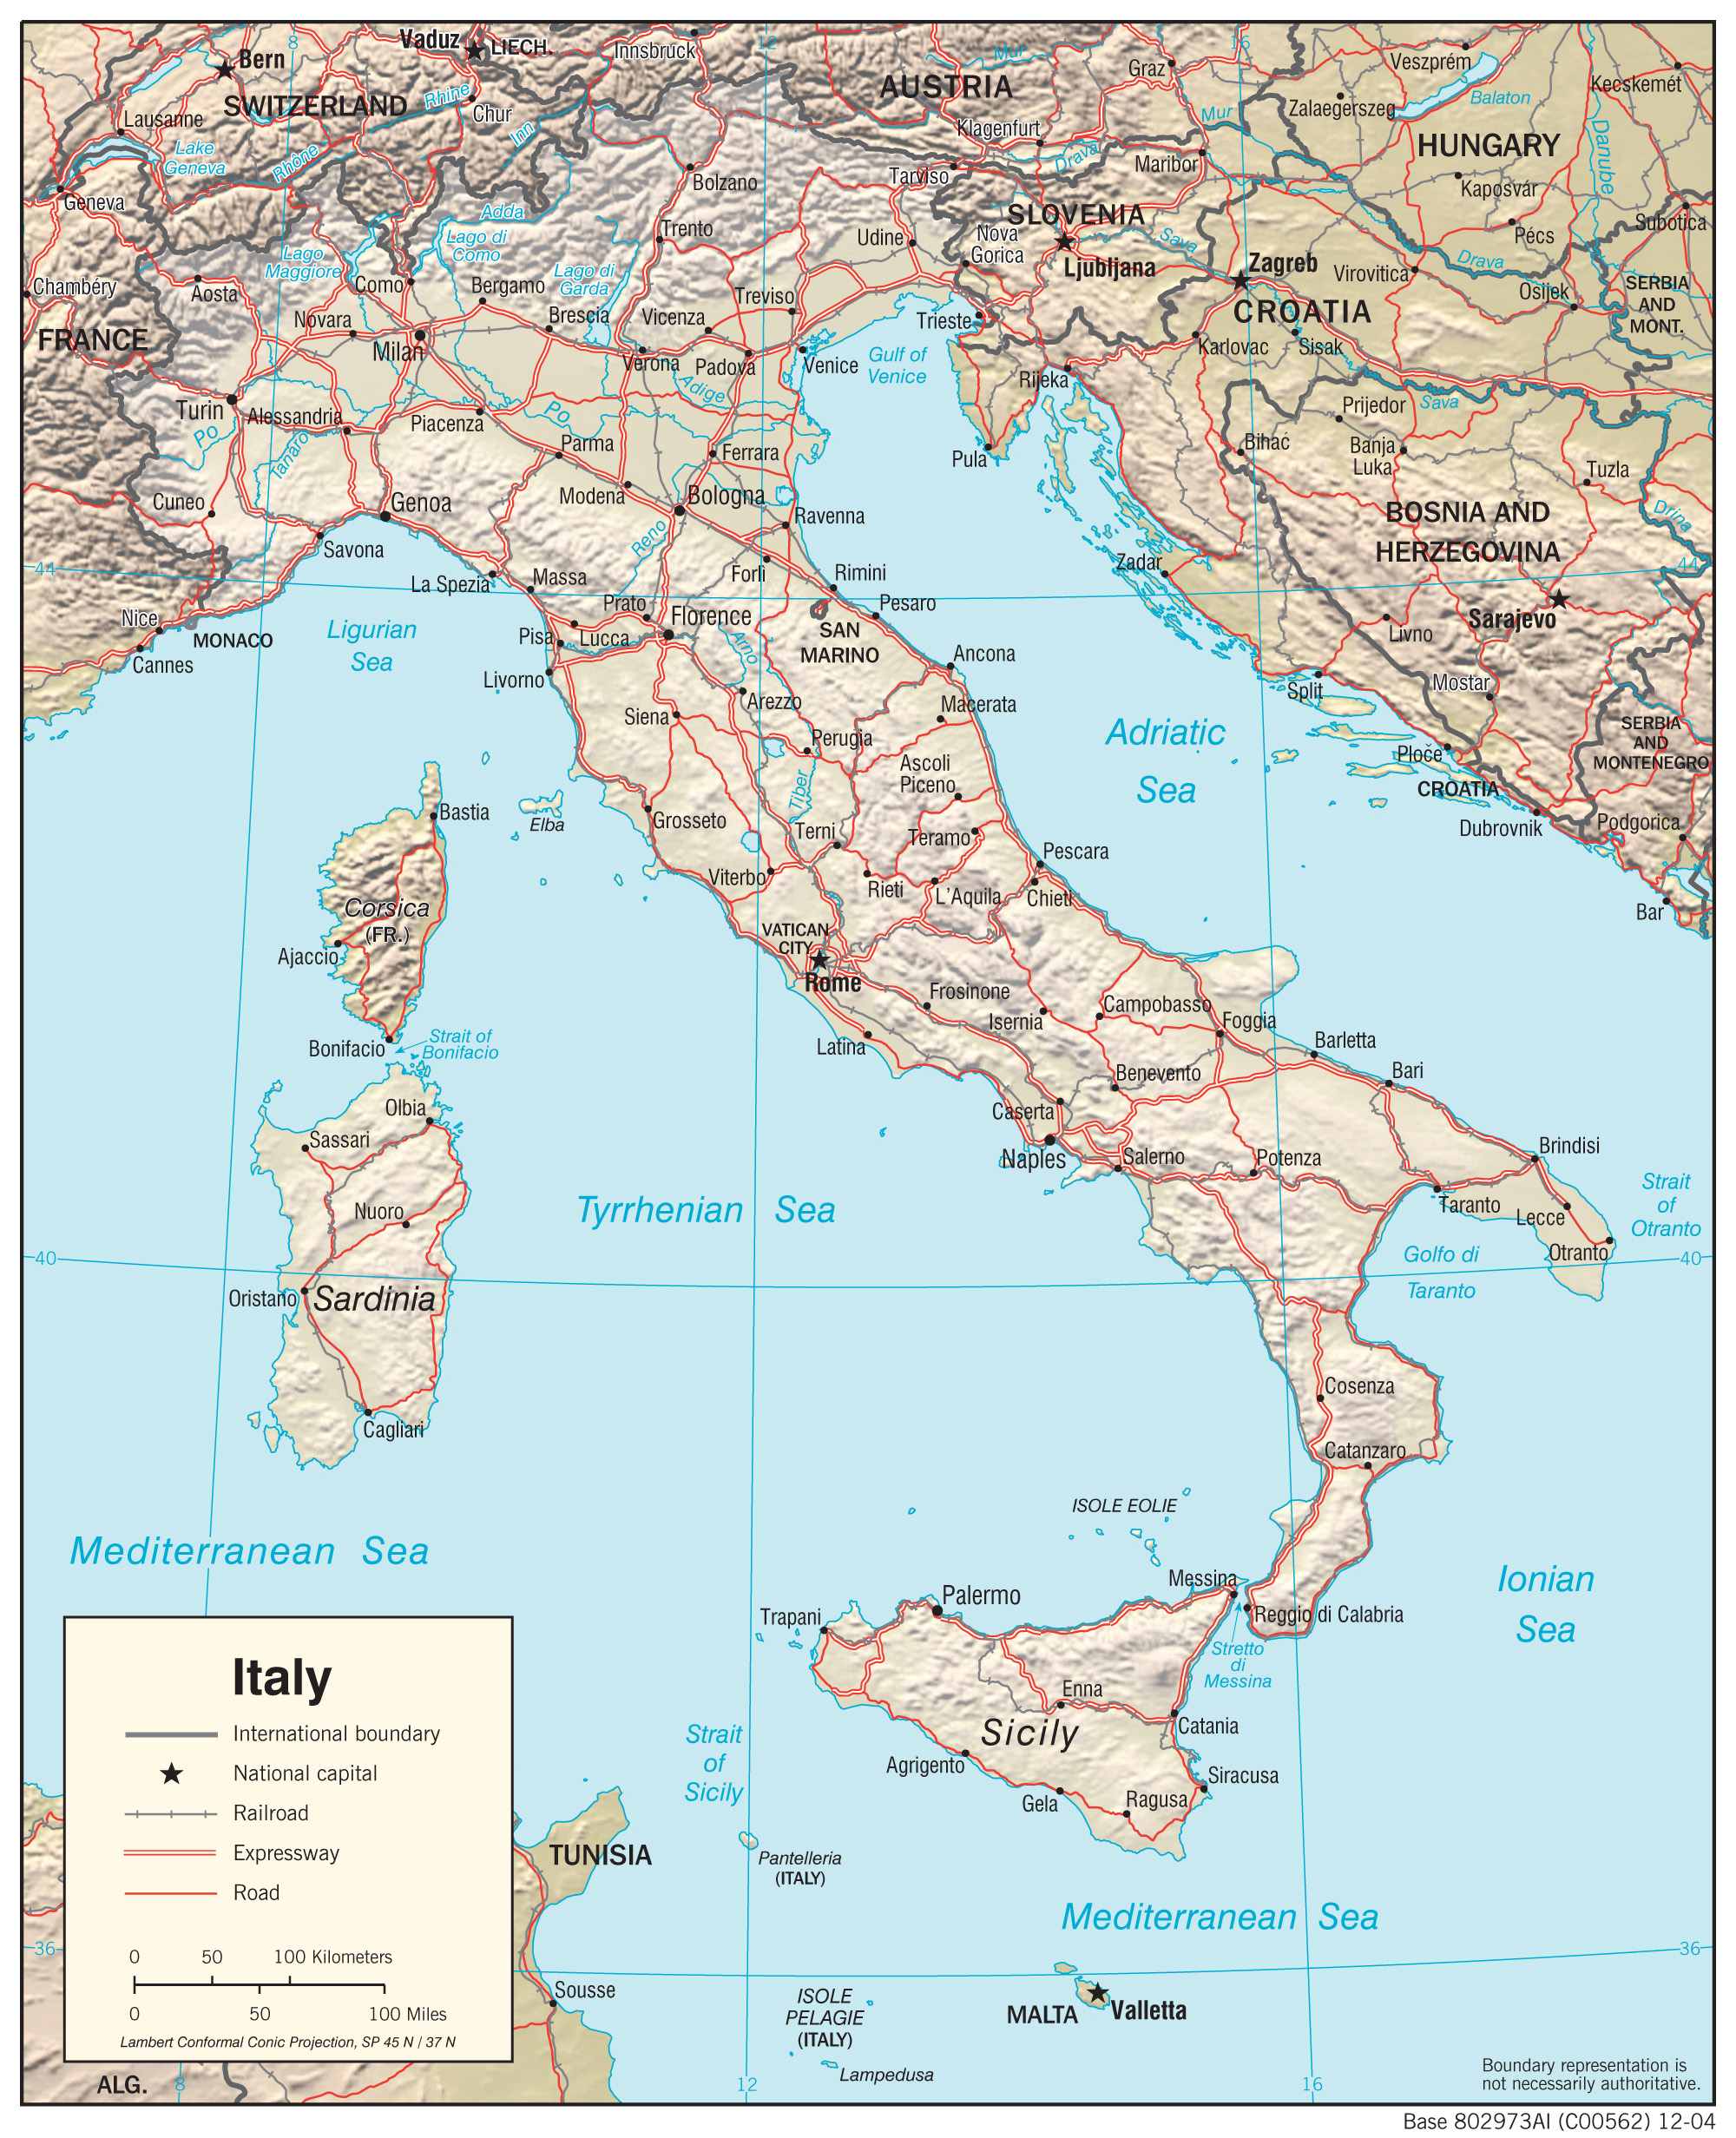 http://www.maps-of-europe.com/maps/maps-of-italy/detailed-political-map-of-italy-with-relief-cities-and-roads.jpg